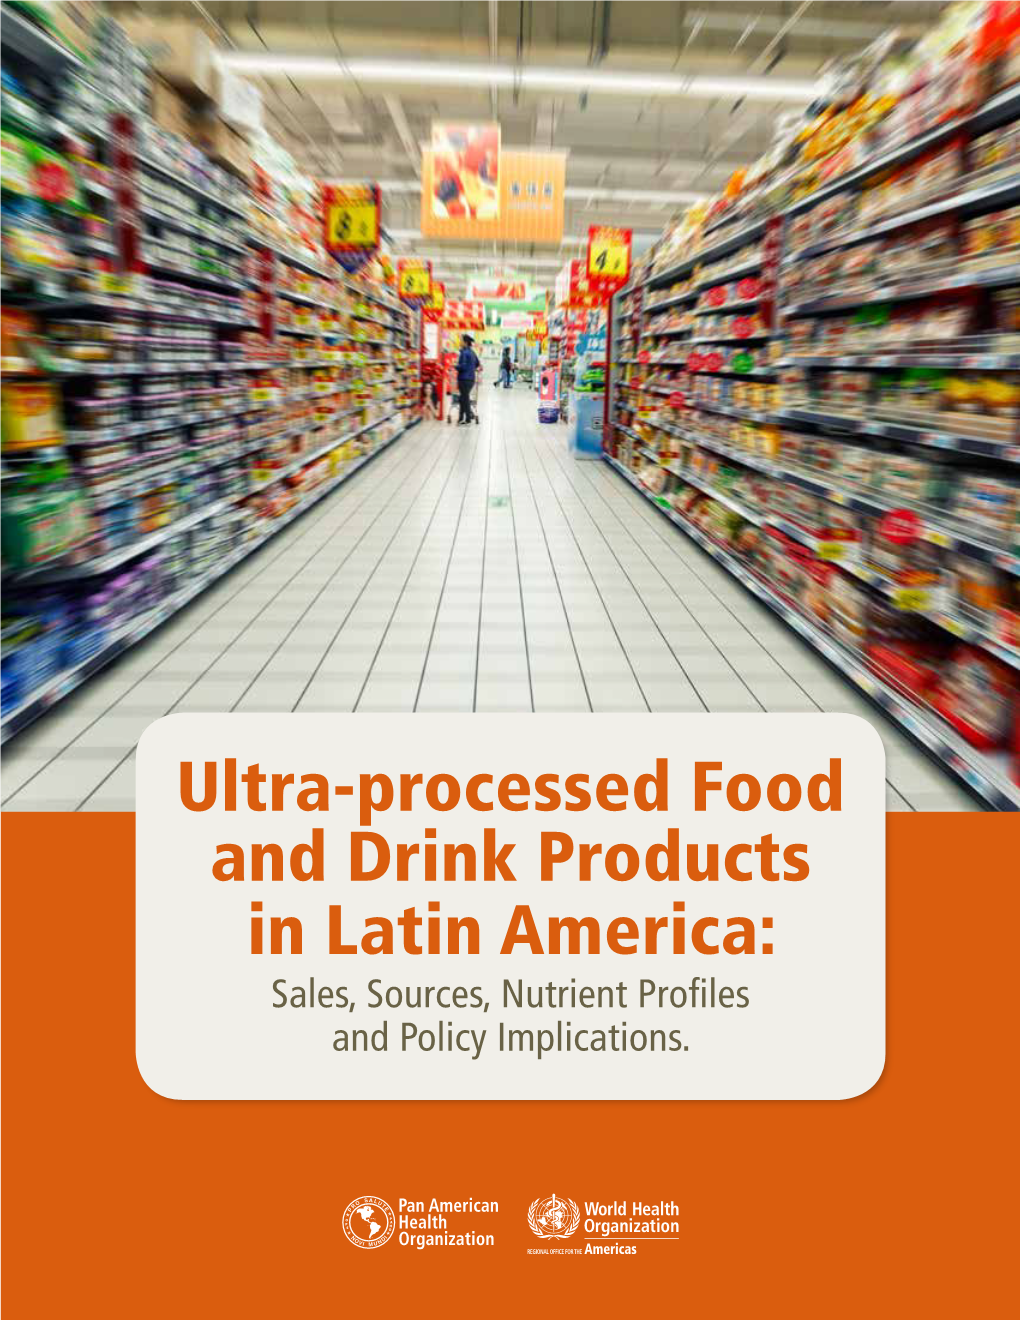 Ultra-Processed Food and Drink Products in Latin America: Sales, Sources, Nutrient Profiles and Policy Implications